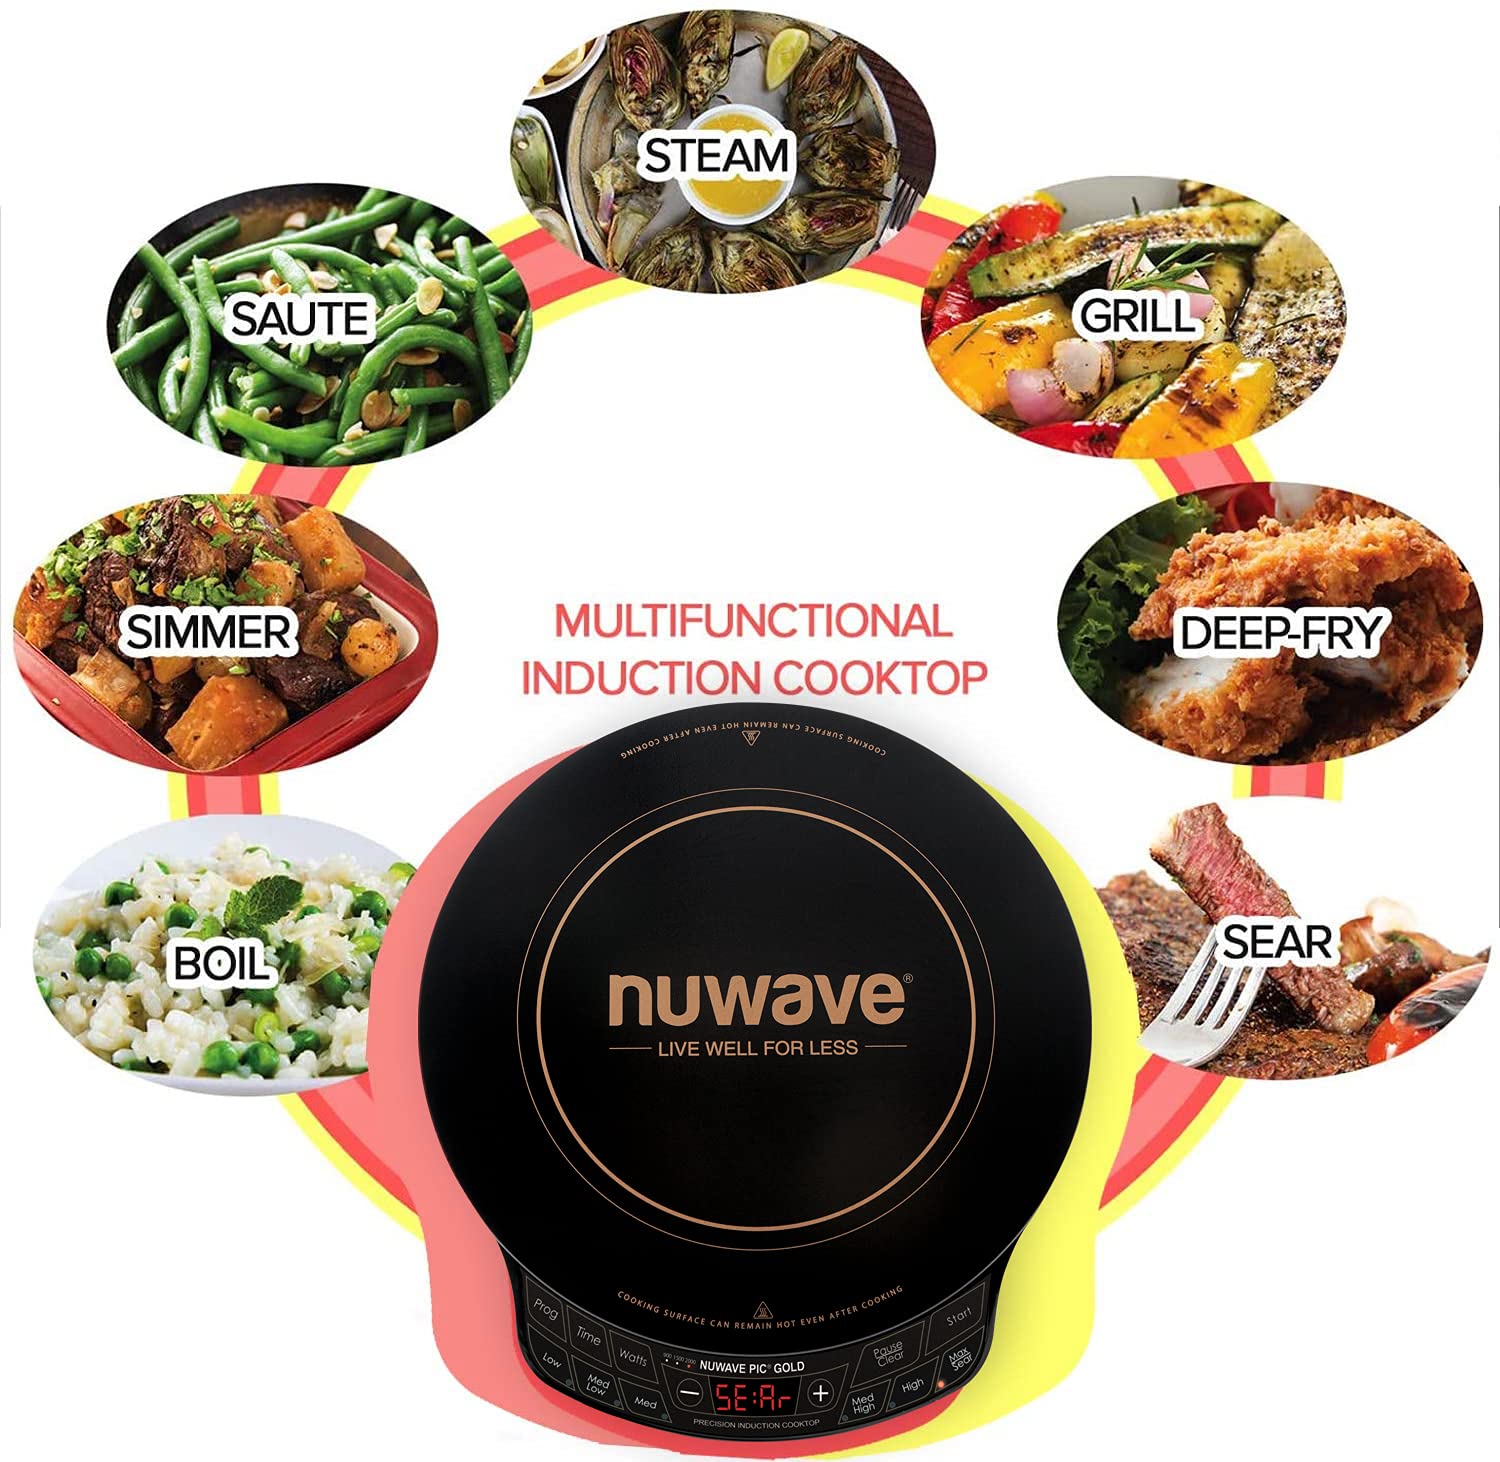 Nuwave Gold Precision Induction Cooktop, Portable, Powerful with Large 8” Heating Coil,100°F to 575°F, 3 Wattage Settings, 12” Heat-Resistant Cooking Surface